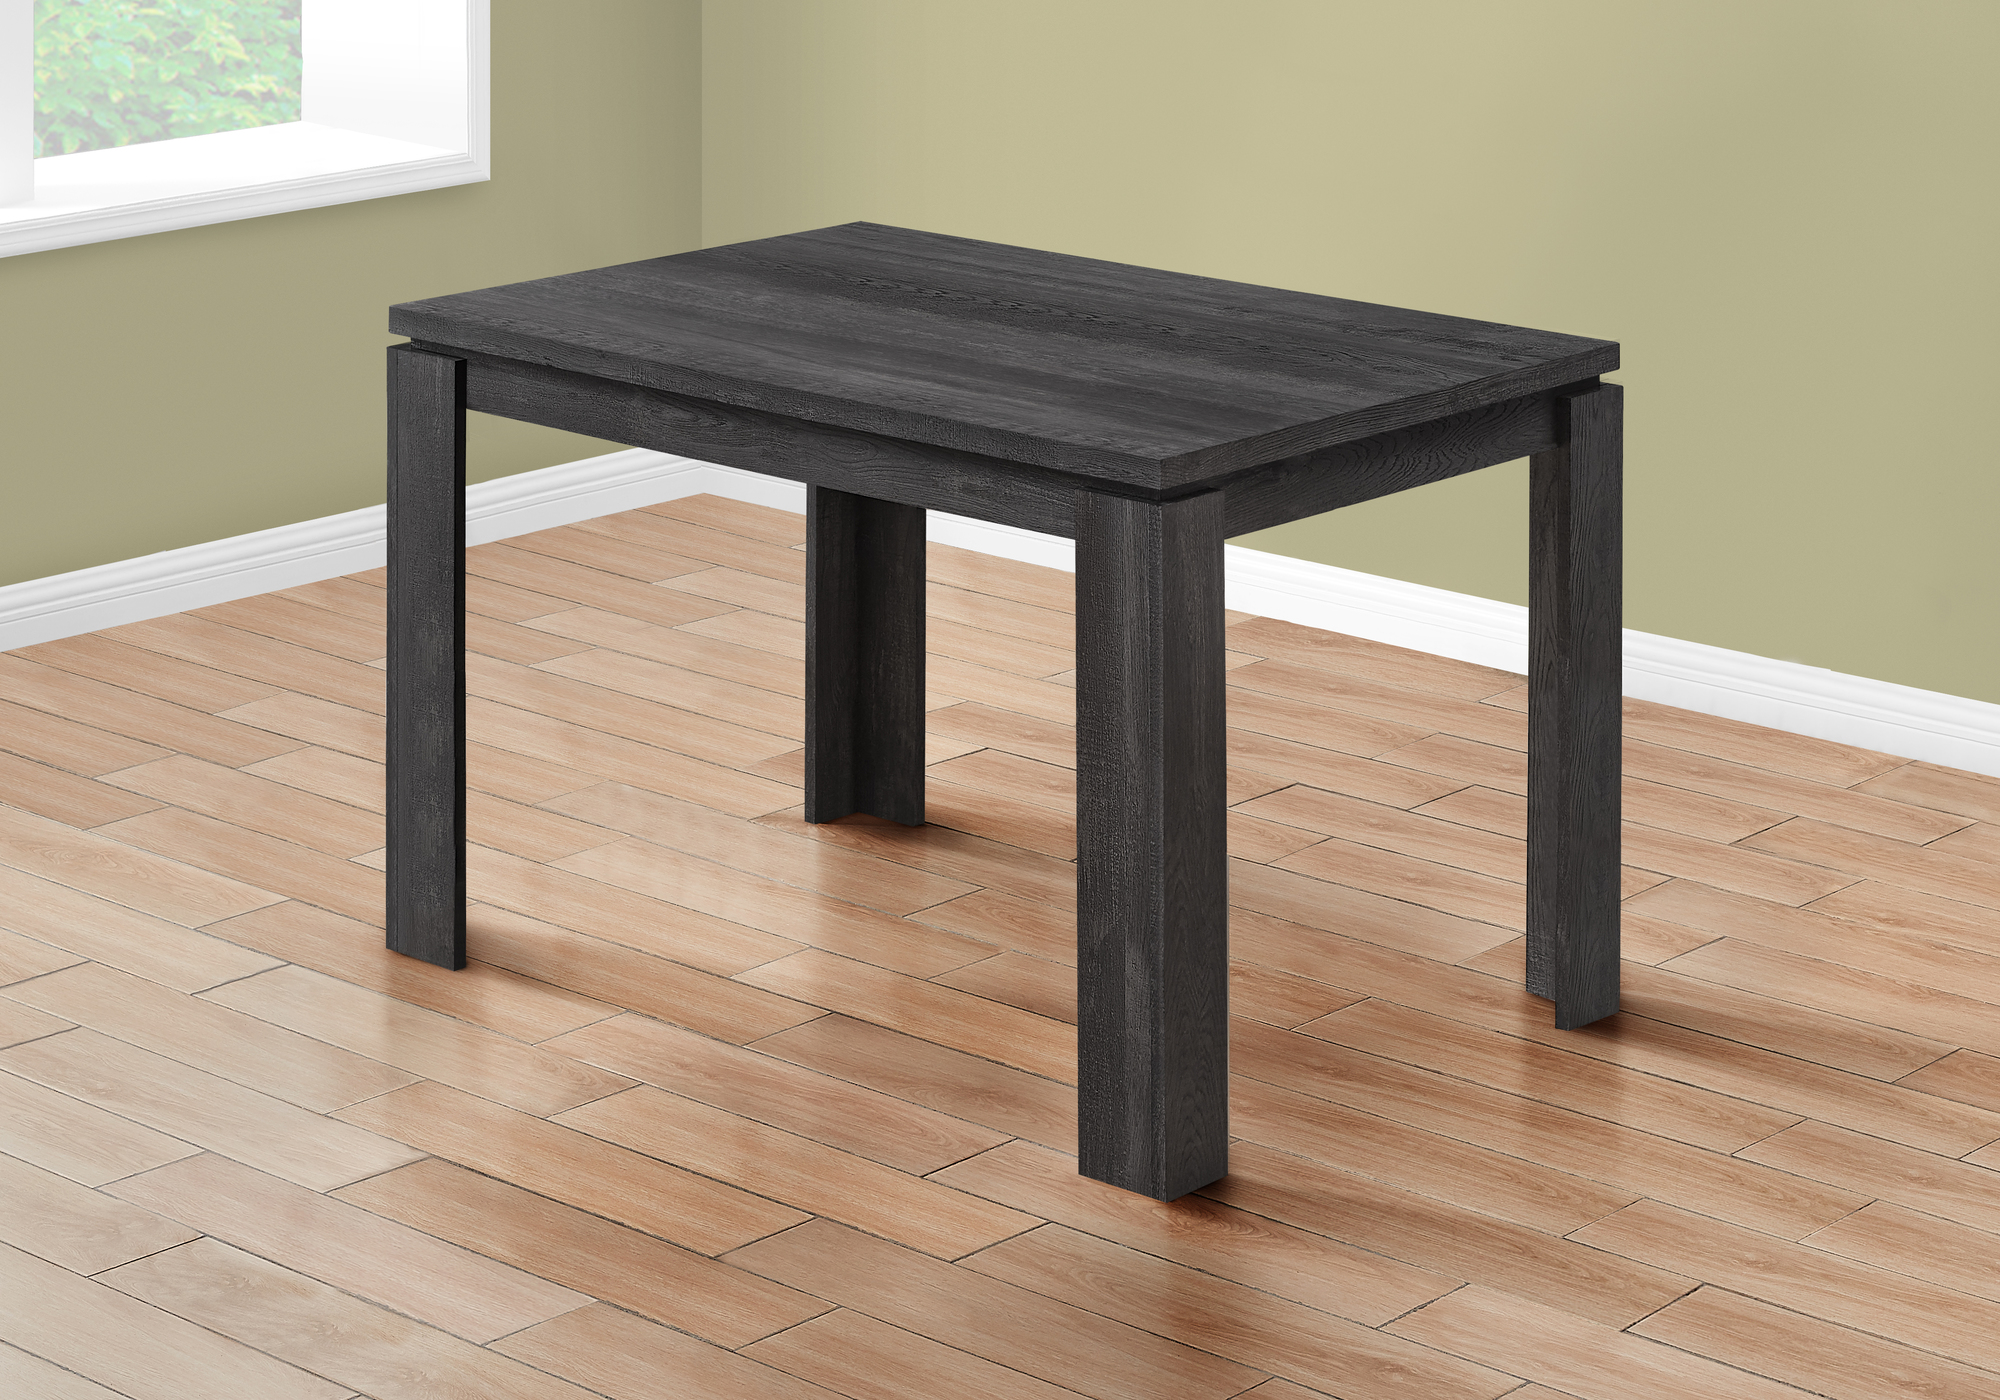 DINING TABLE - 32"X 48" / BLACK RECLAIMED WOOD-LOOK